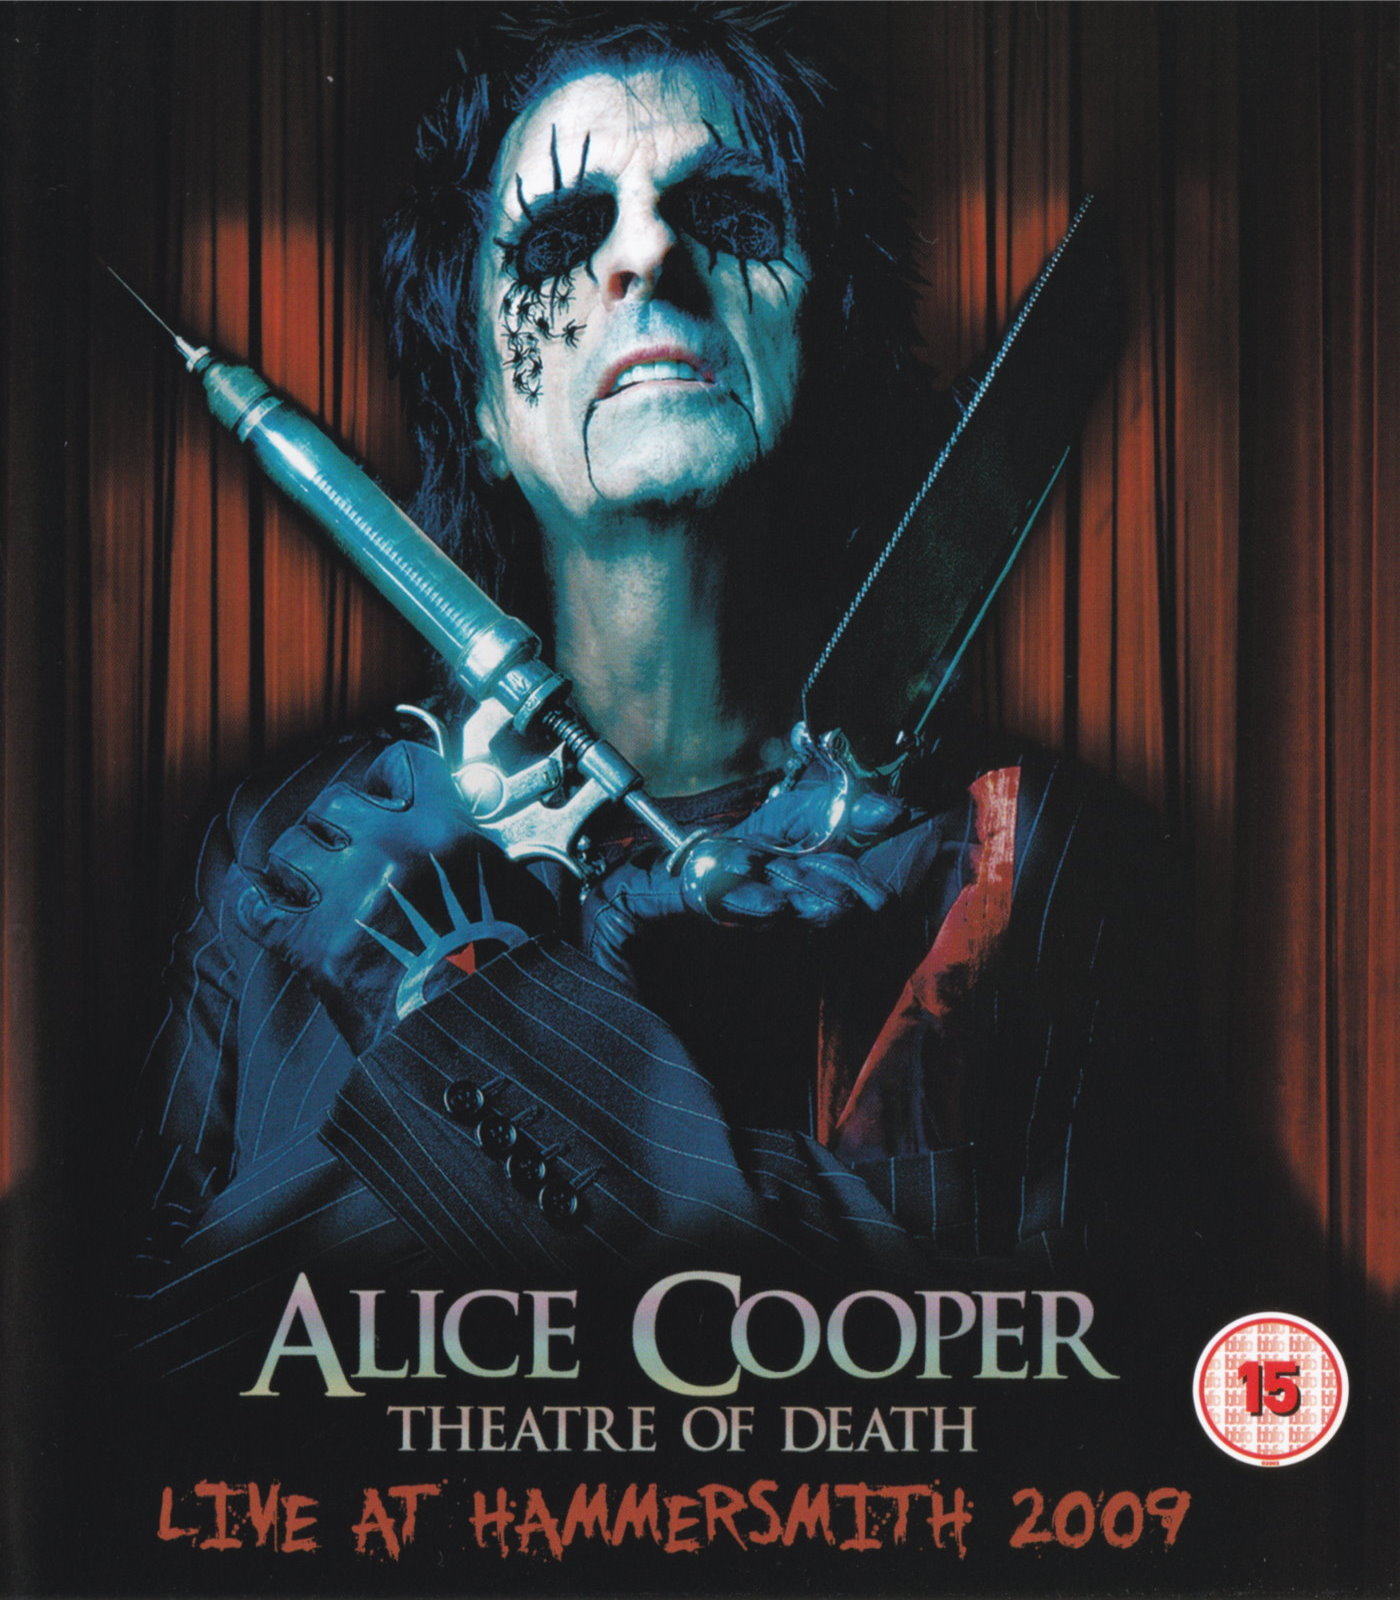 Cover - Alice Cooper - Theatre Of Death - Live At Hammersmith 2009.jpg